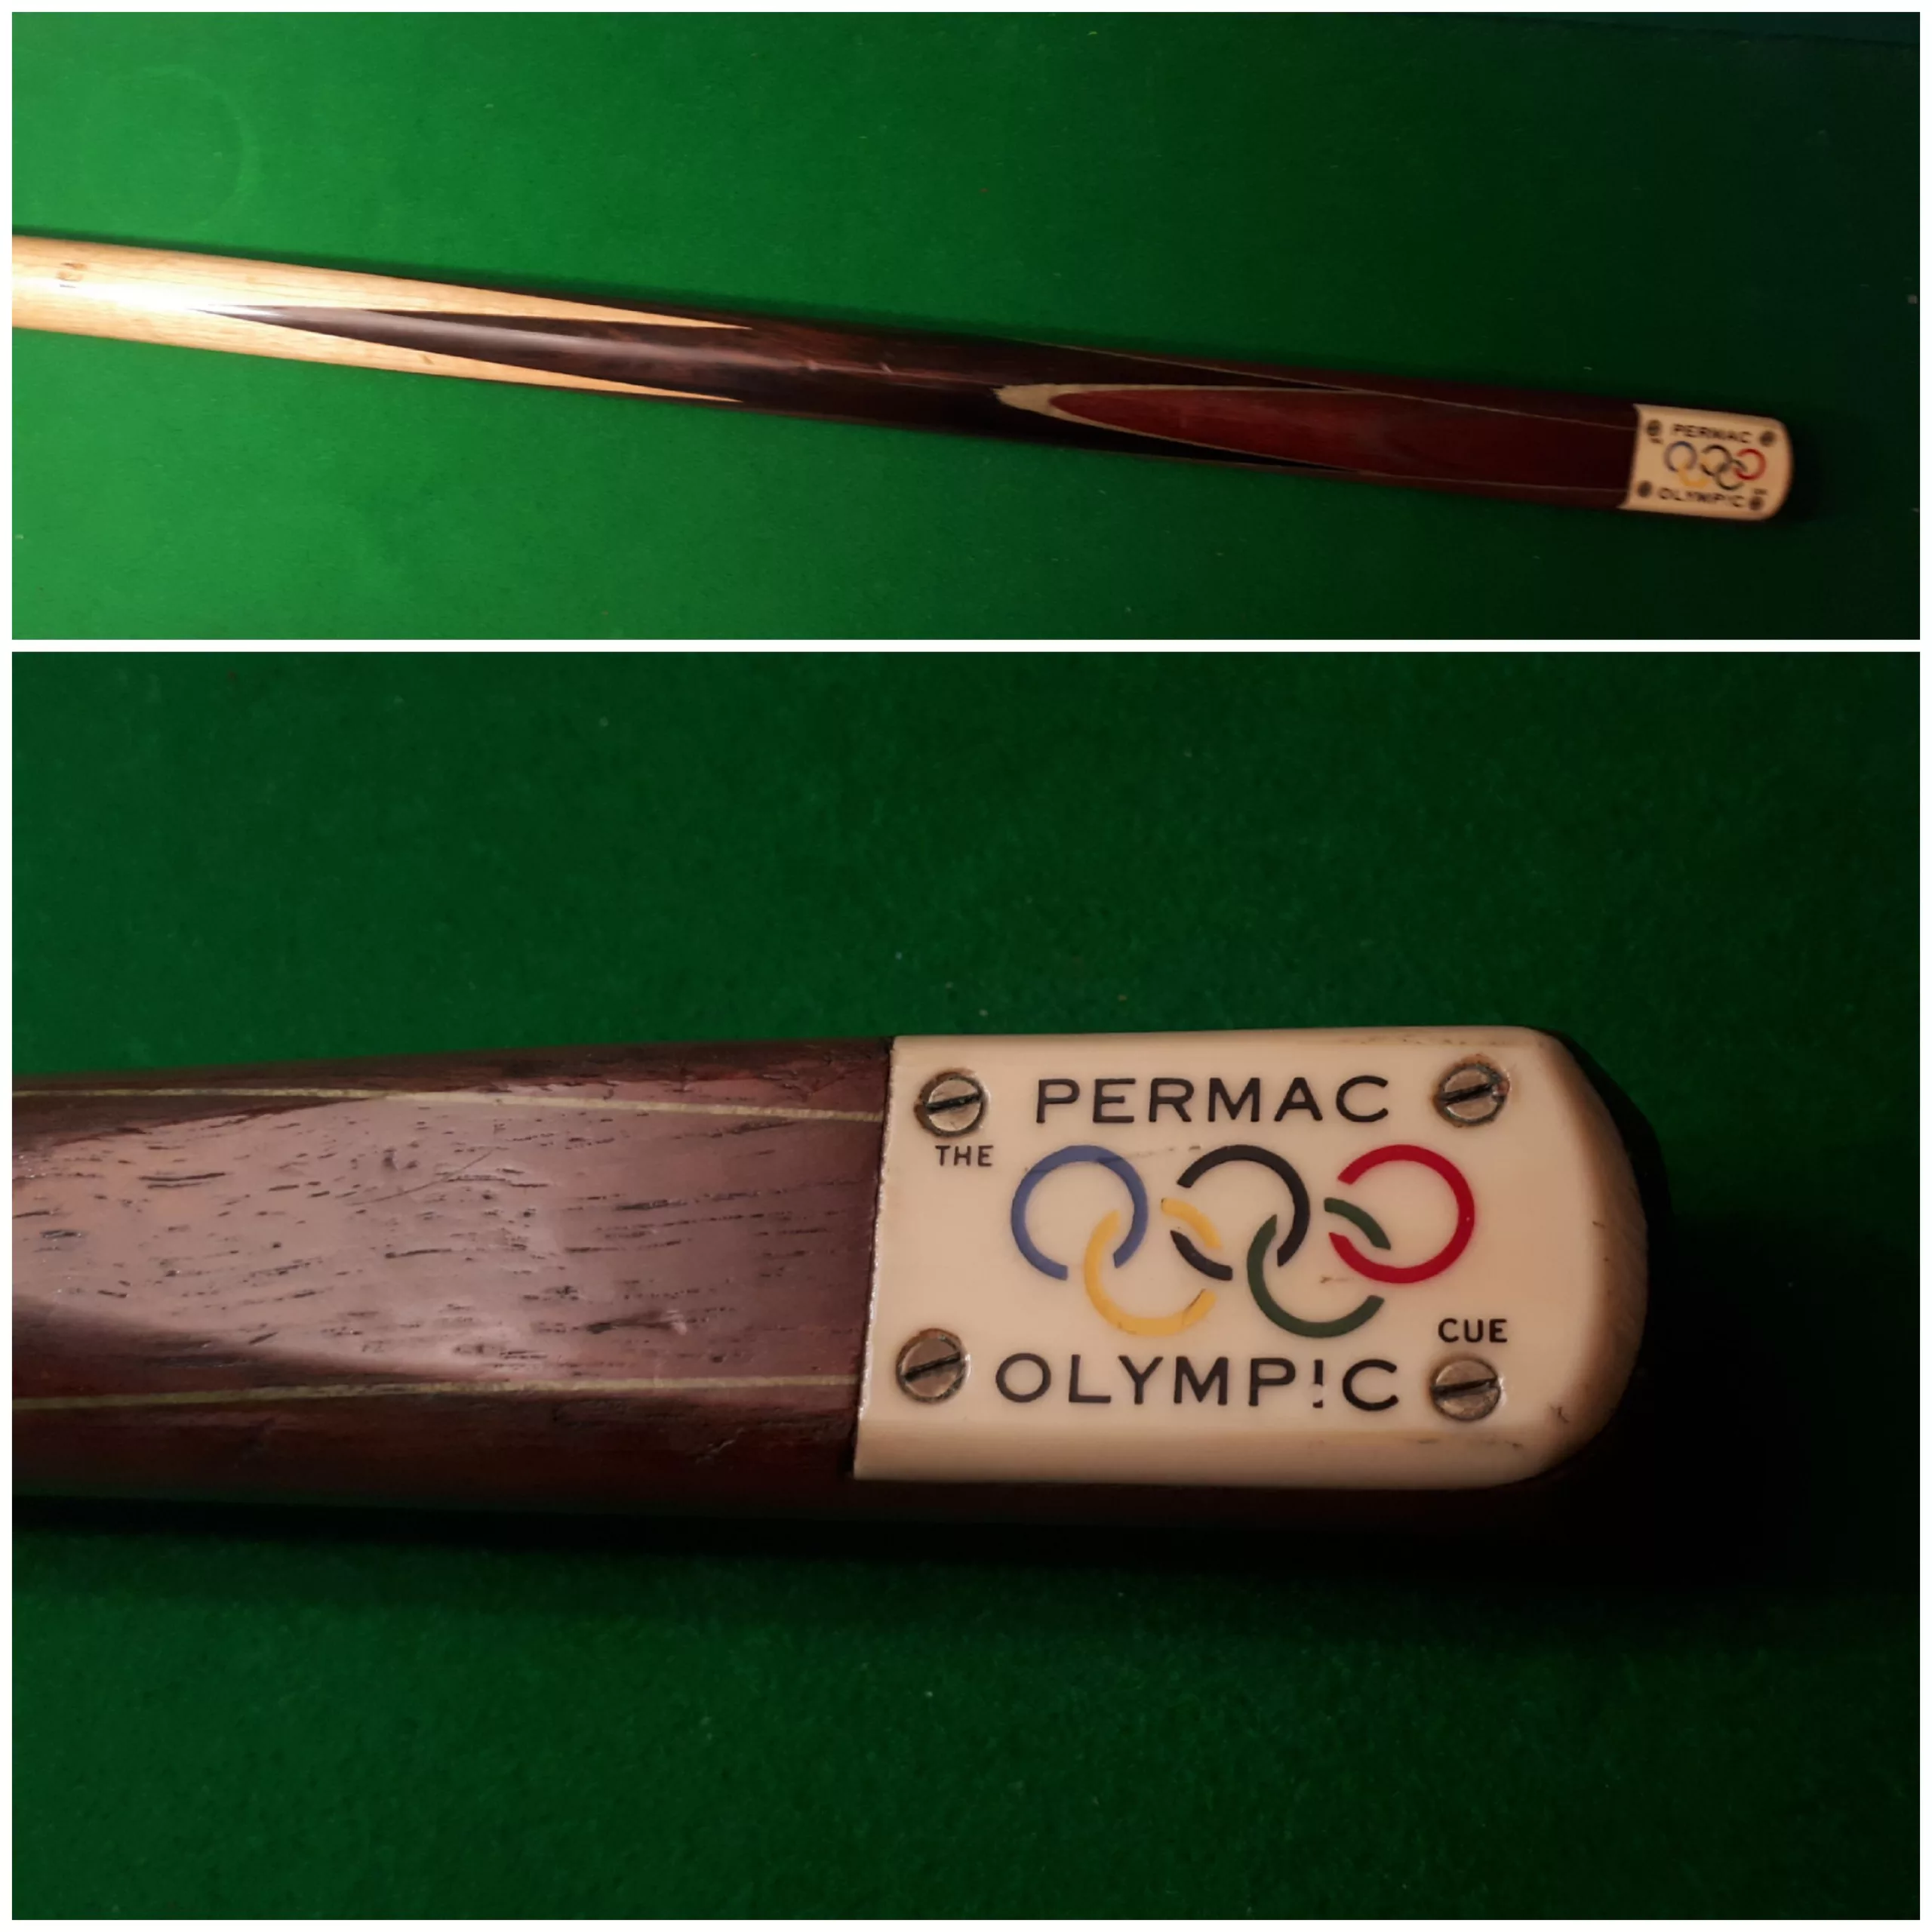 Permac Olympic cue